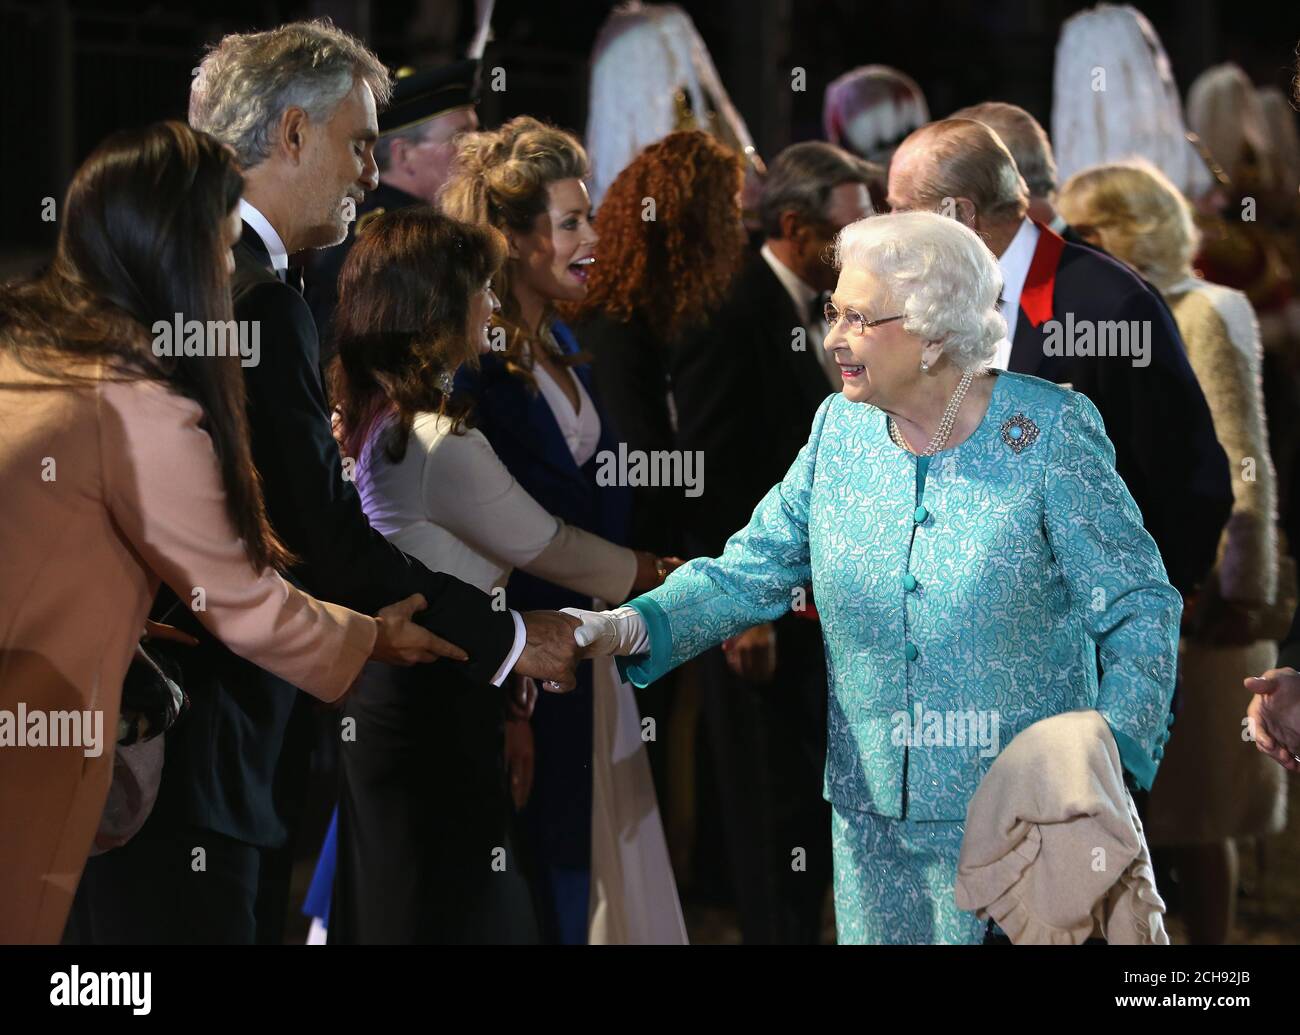 Queen Elizabeth II greets Andrea Bocelli during the televised celebration of her 90th birthday in the grounds of Windsor Castle in Berkshire. Stock Photo